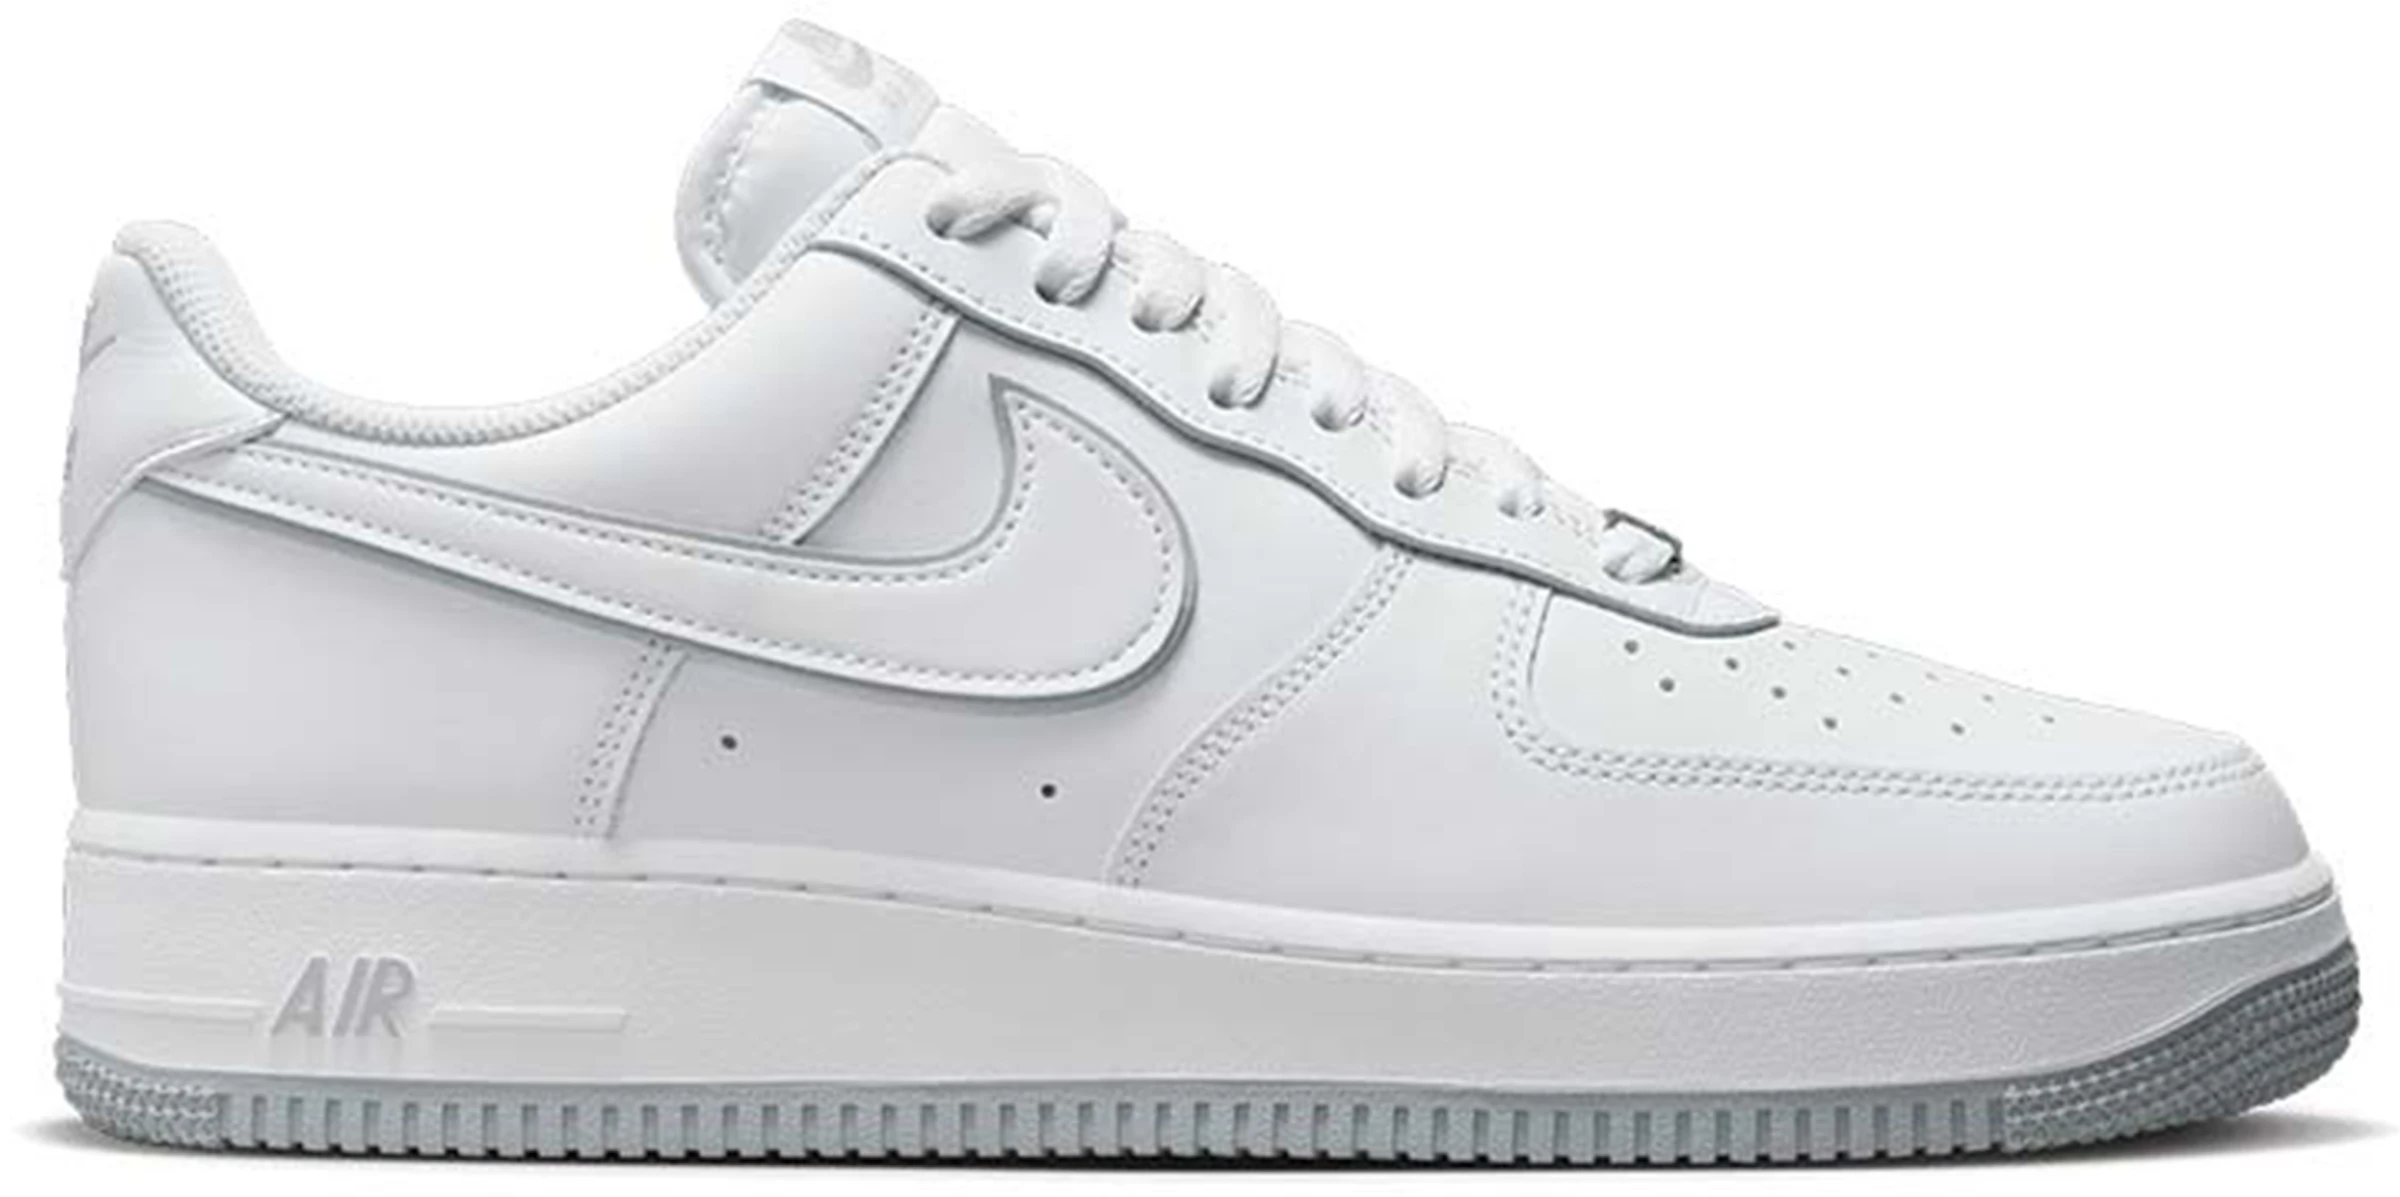 Nike Air Force 1 '07 Low White Wolf Grey Sole - DV0788-100 - MX